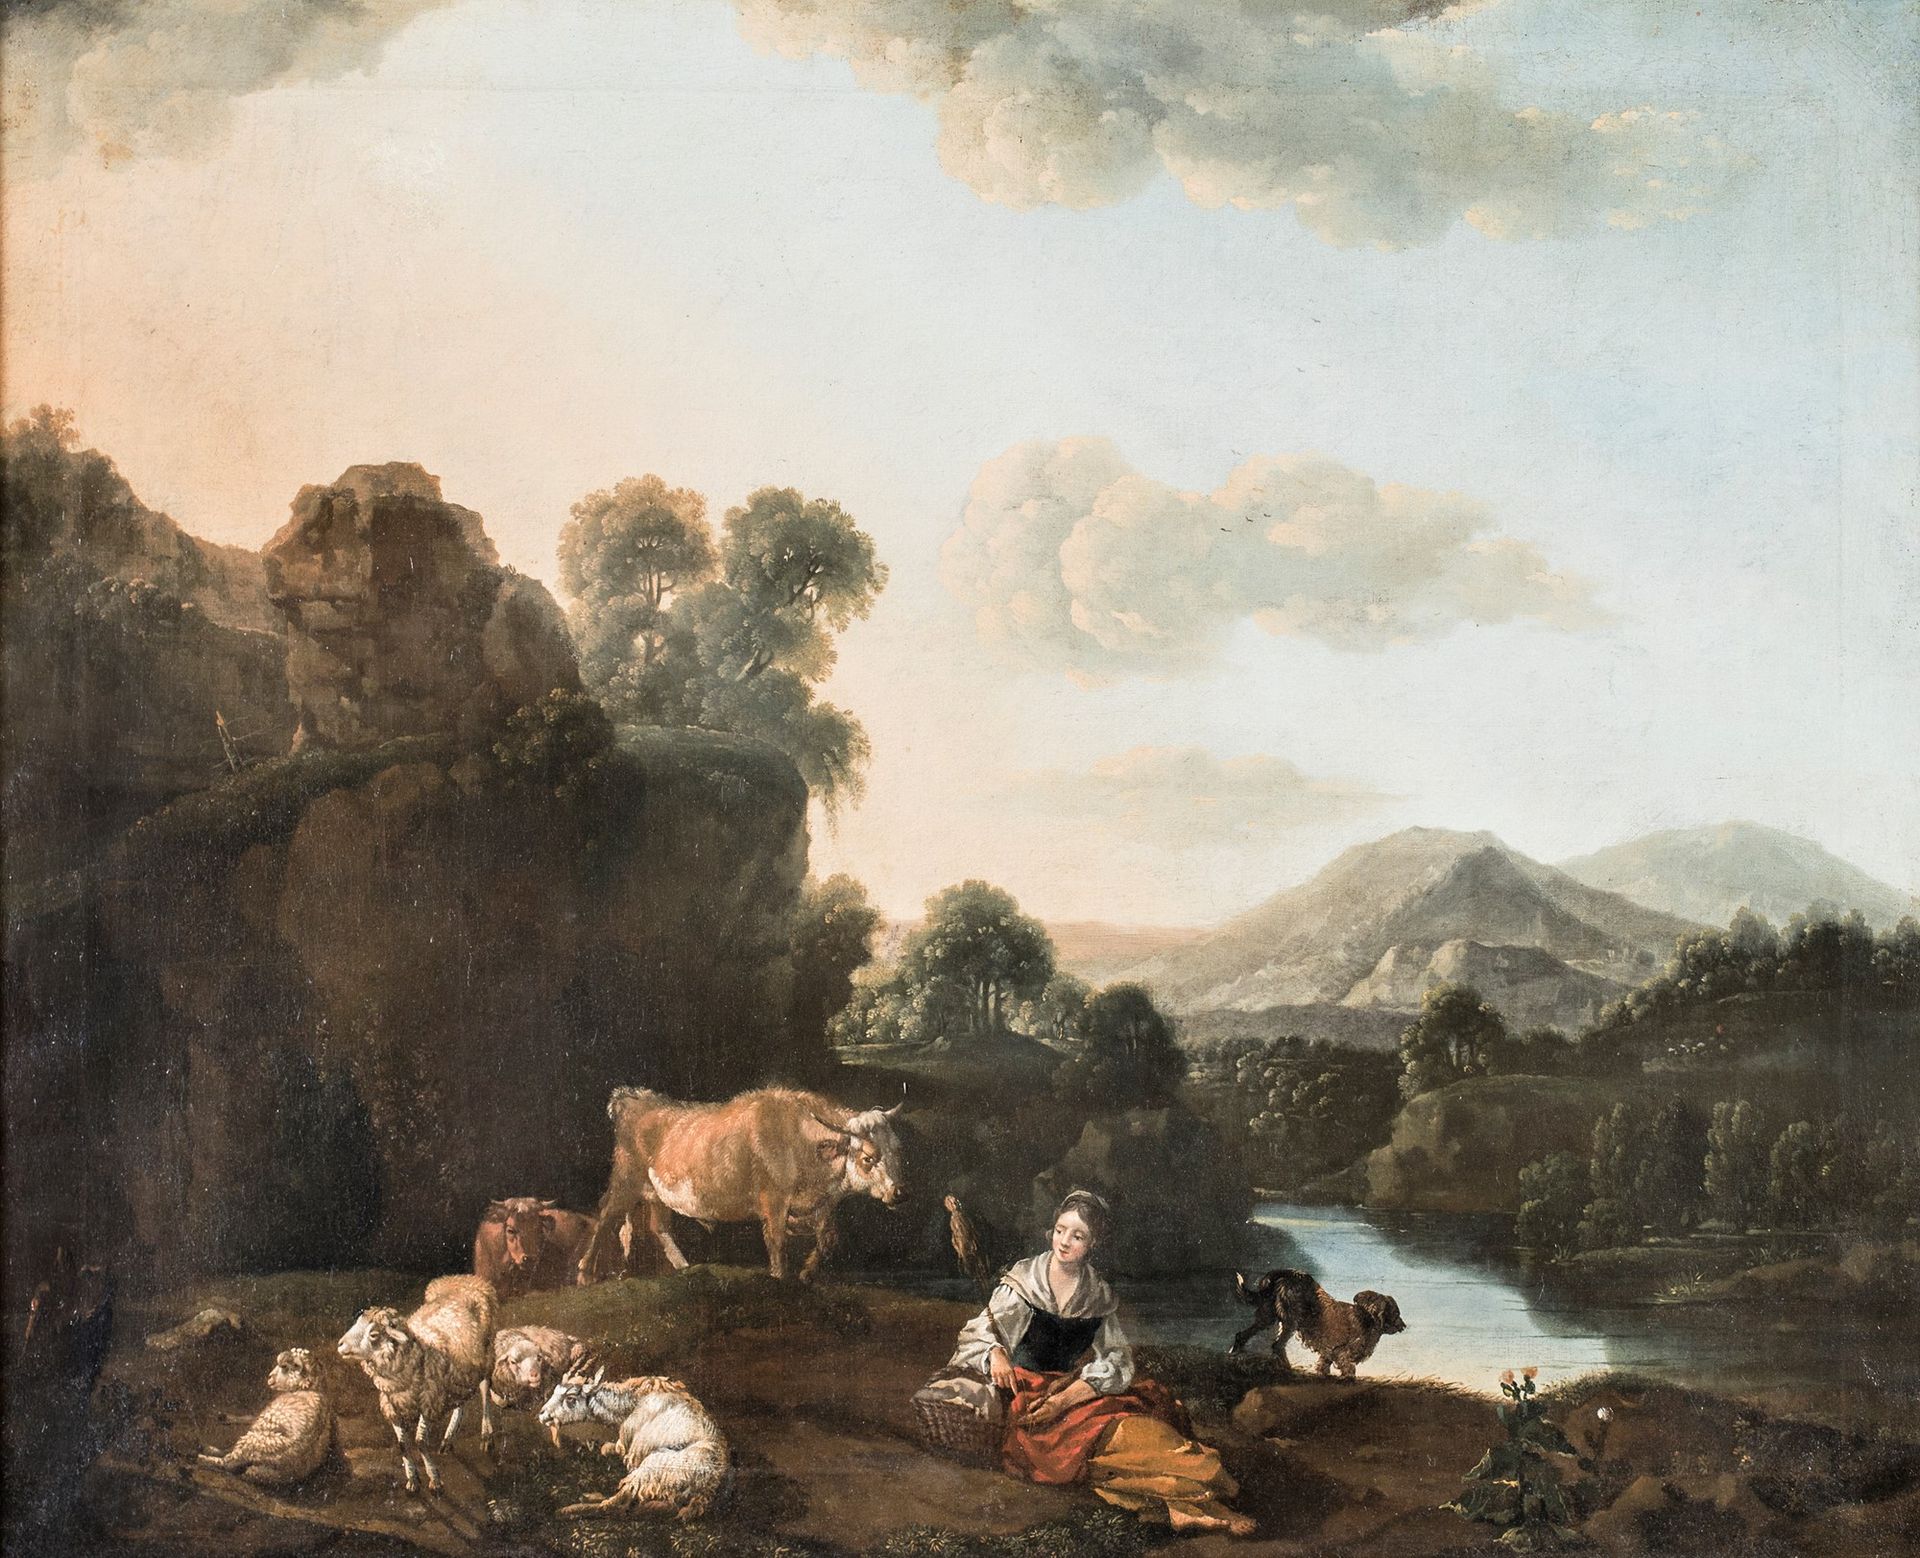 Scuola Romana del XVIII secolo Landscape with shepherdess and herds 画布上的油画